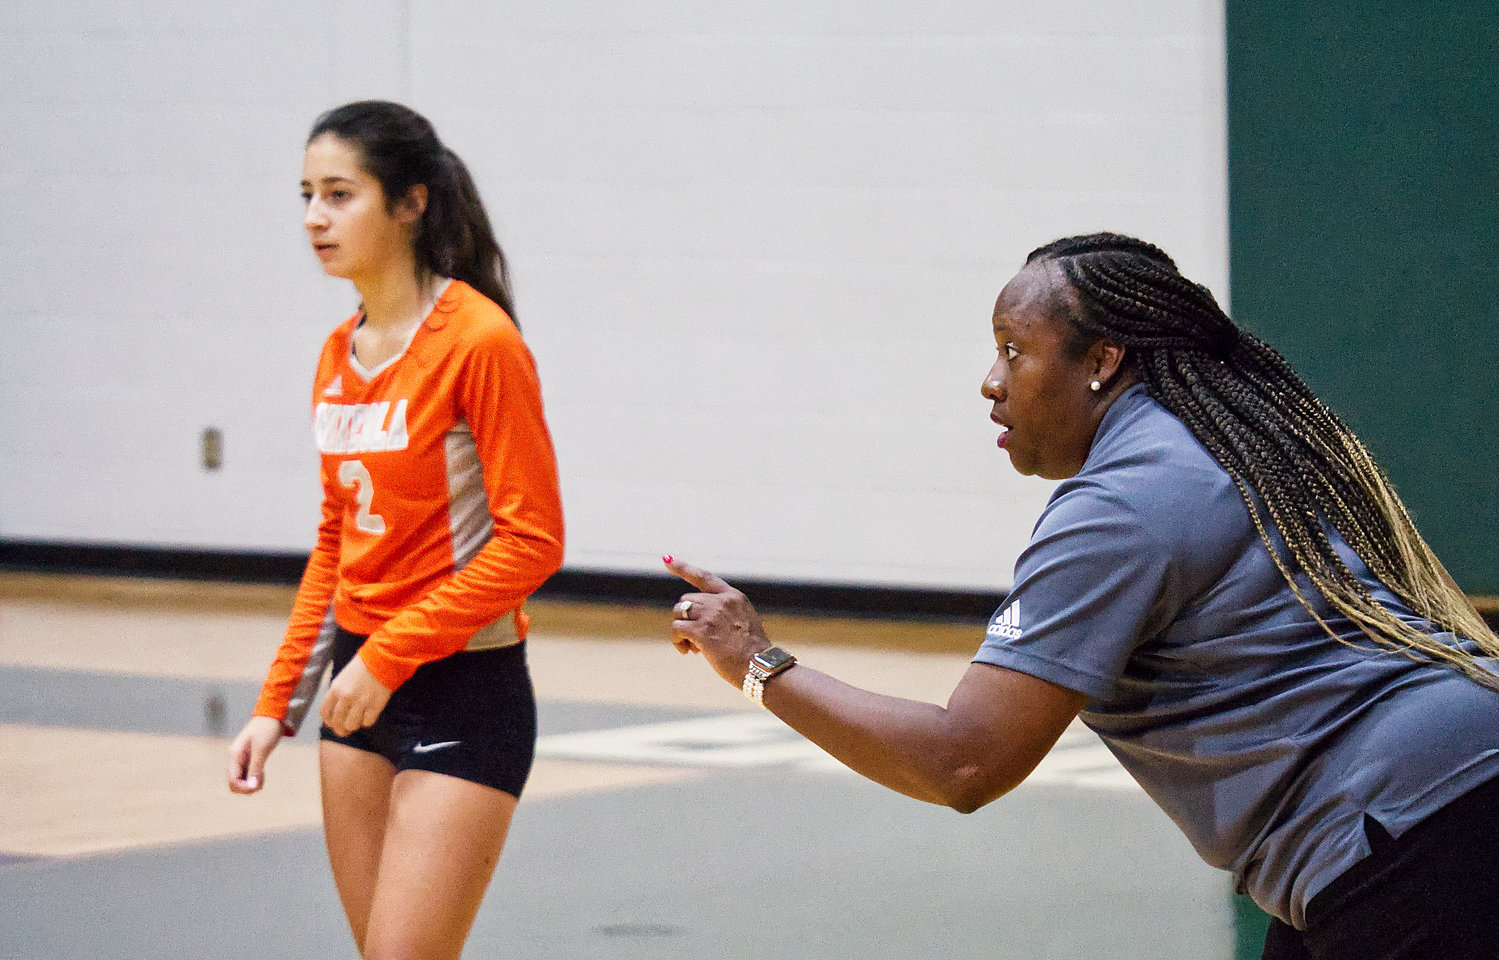 Mineola Coach TaShara Everett is actively encouraging on the sidelines. “Good,” is echoed throughout the gym, affirming her players seemingly every time a Lady Jacket does something she’s asked of them.